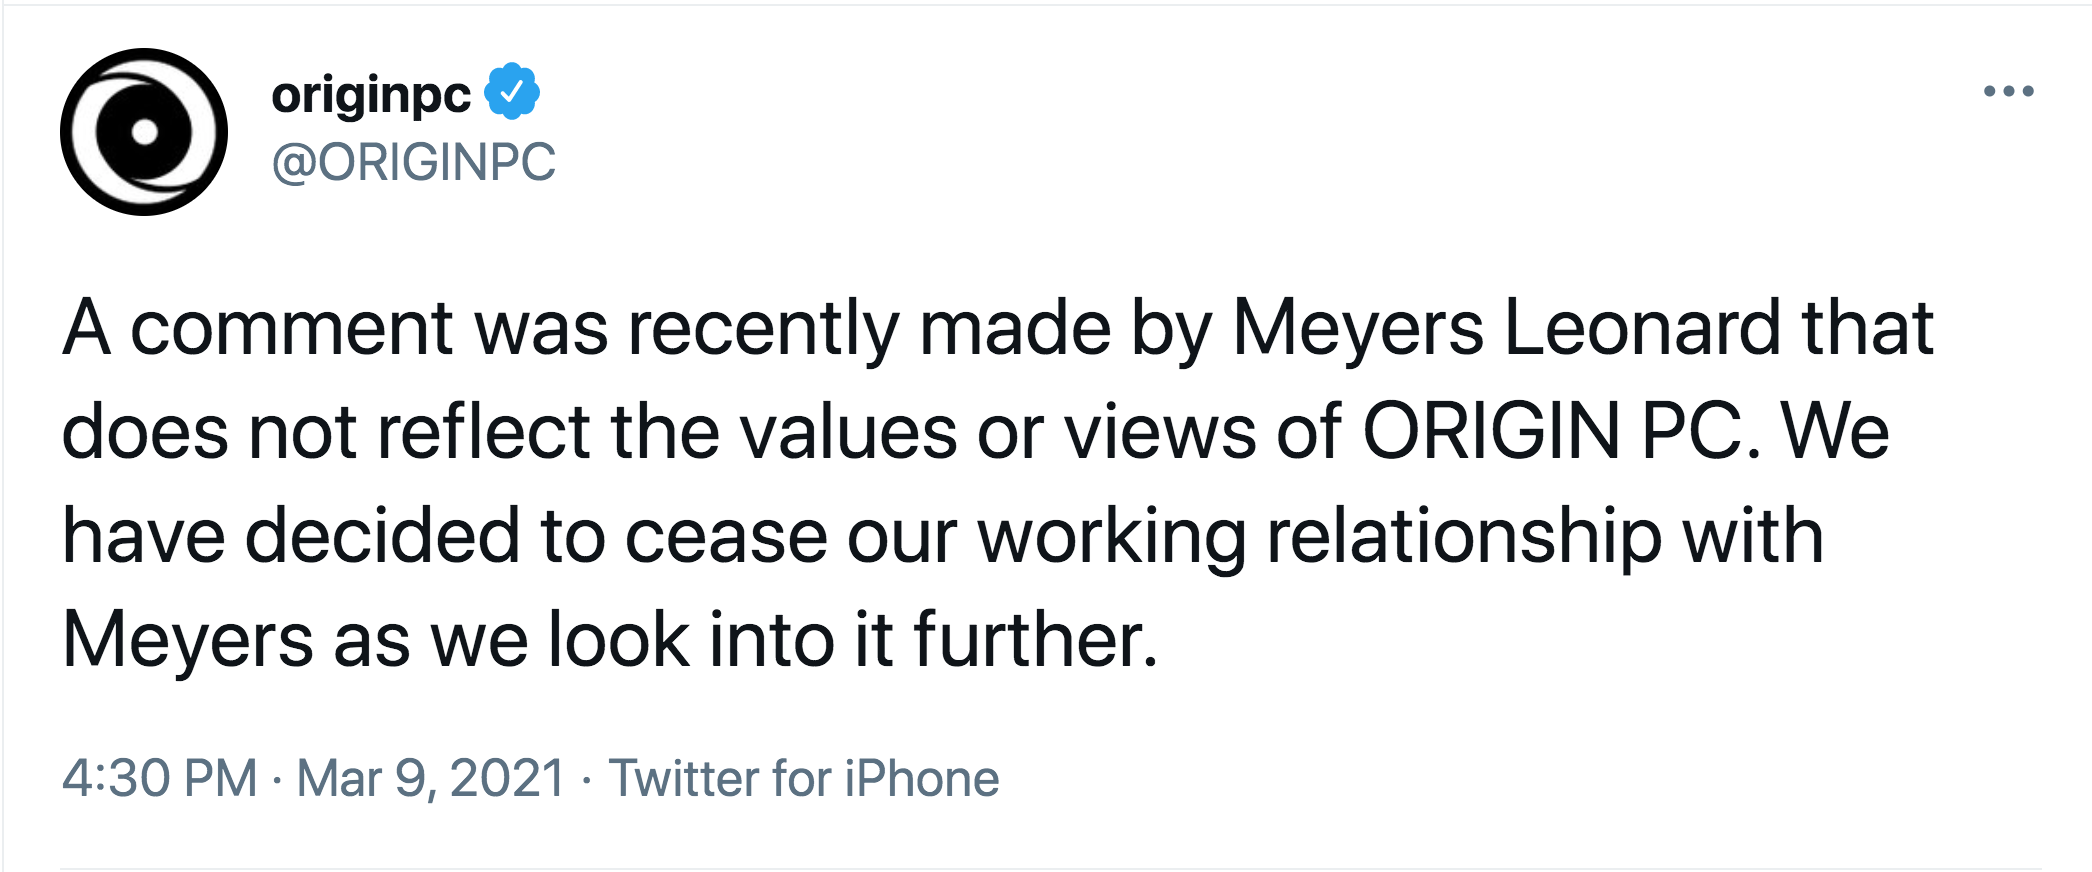 Meyers Leonard Anti-Semitic Slur - angle - originpc A comment was recently made by Meyers Leonard that does not reflect the values or views of Origin Pc. We have decided to cease our working relationship with Meyers as we look into it further. Twitter for